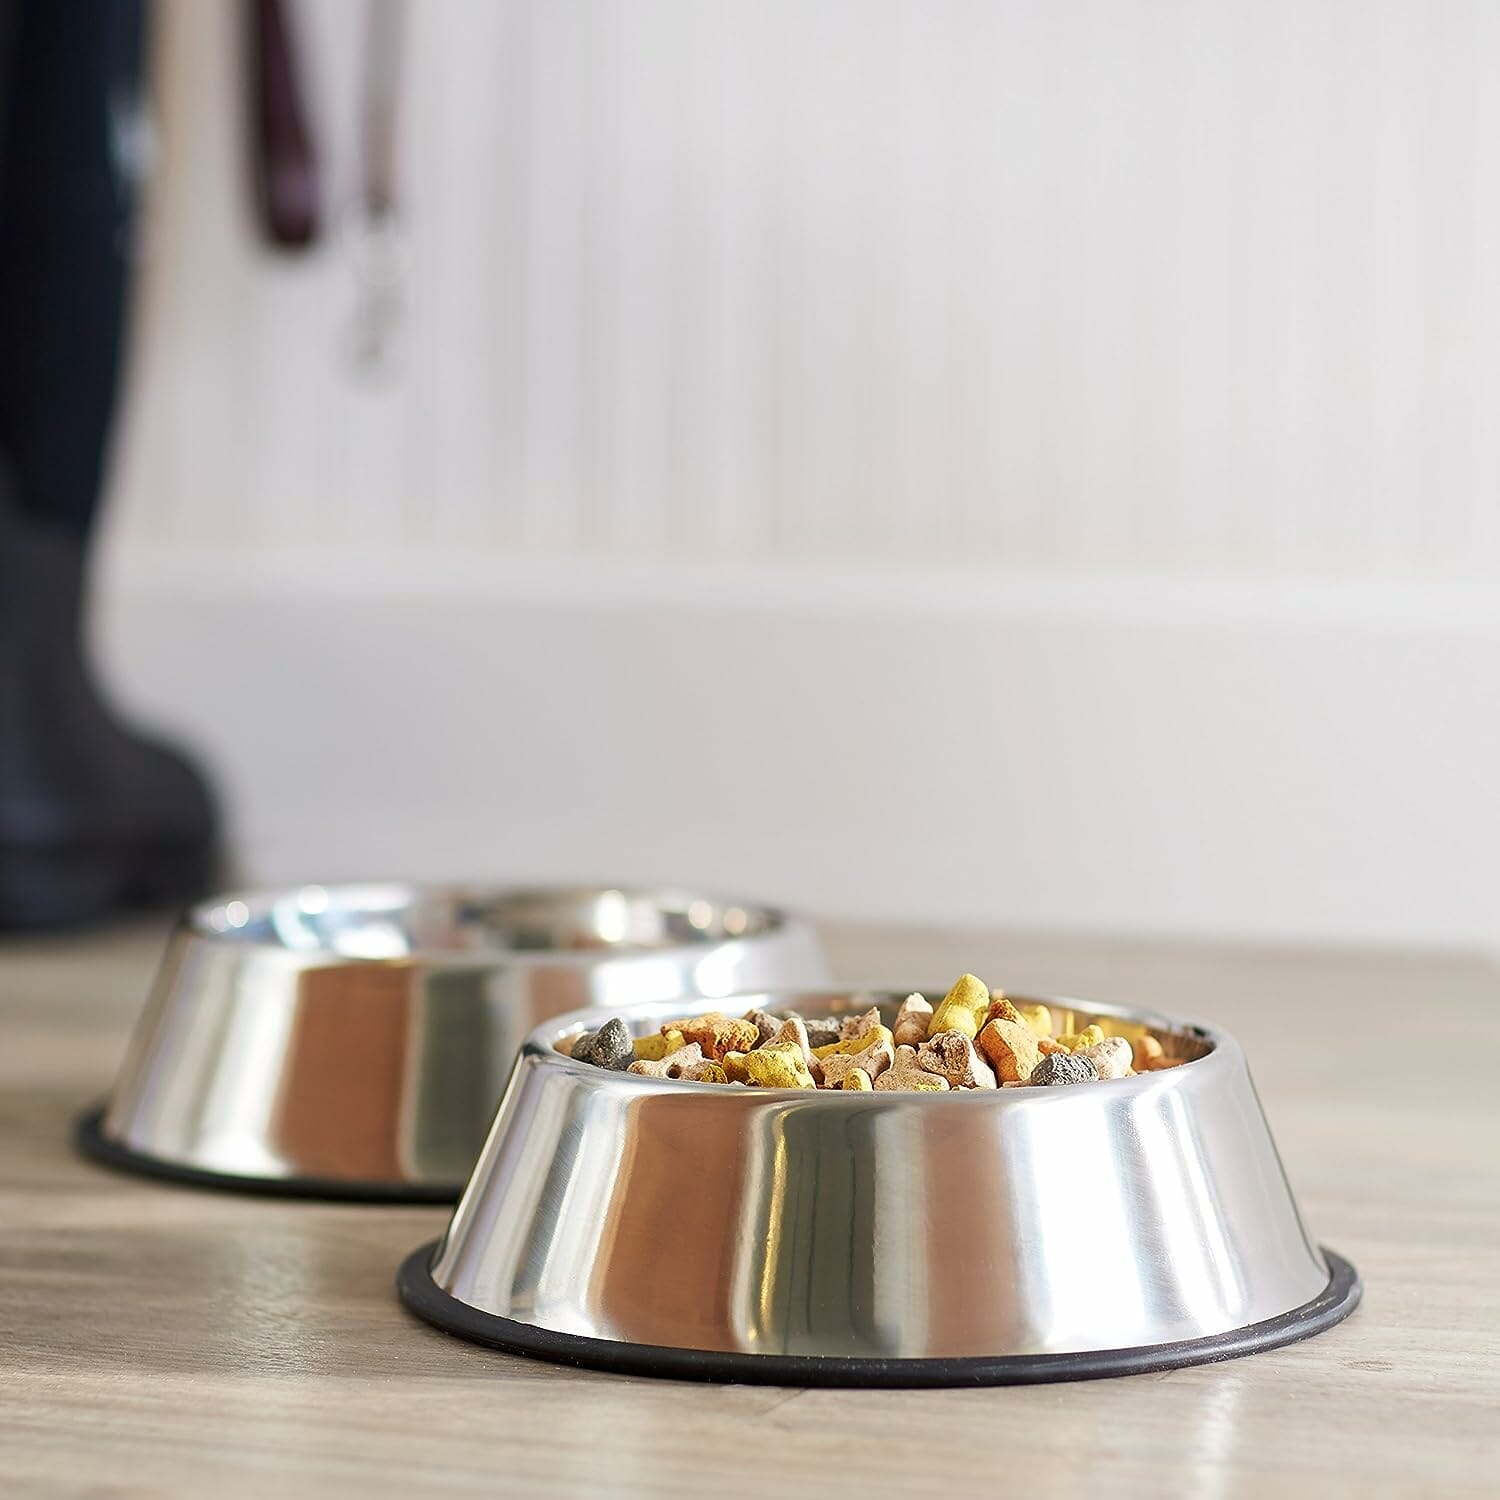 Amazon Basics Stainless Steel Non-Skid Pet Dog Water And Food Bowl Review